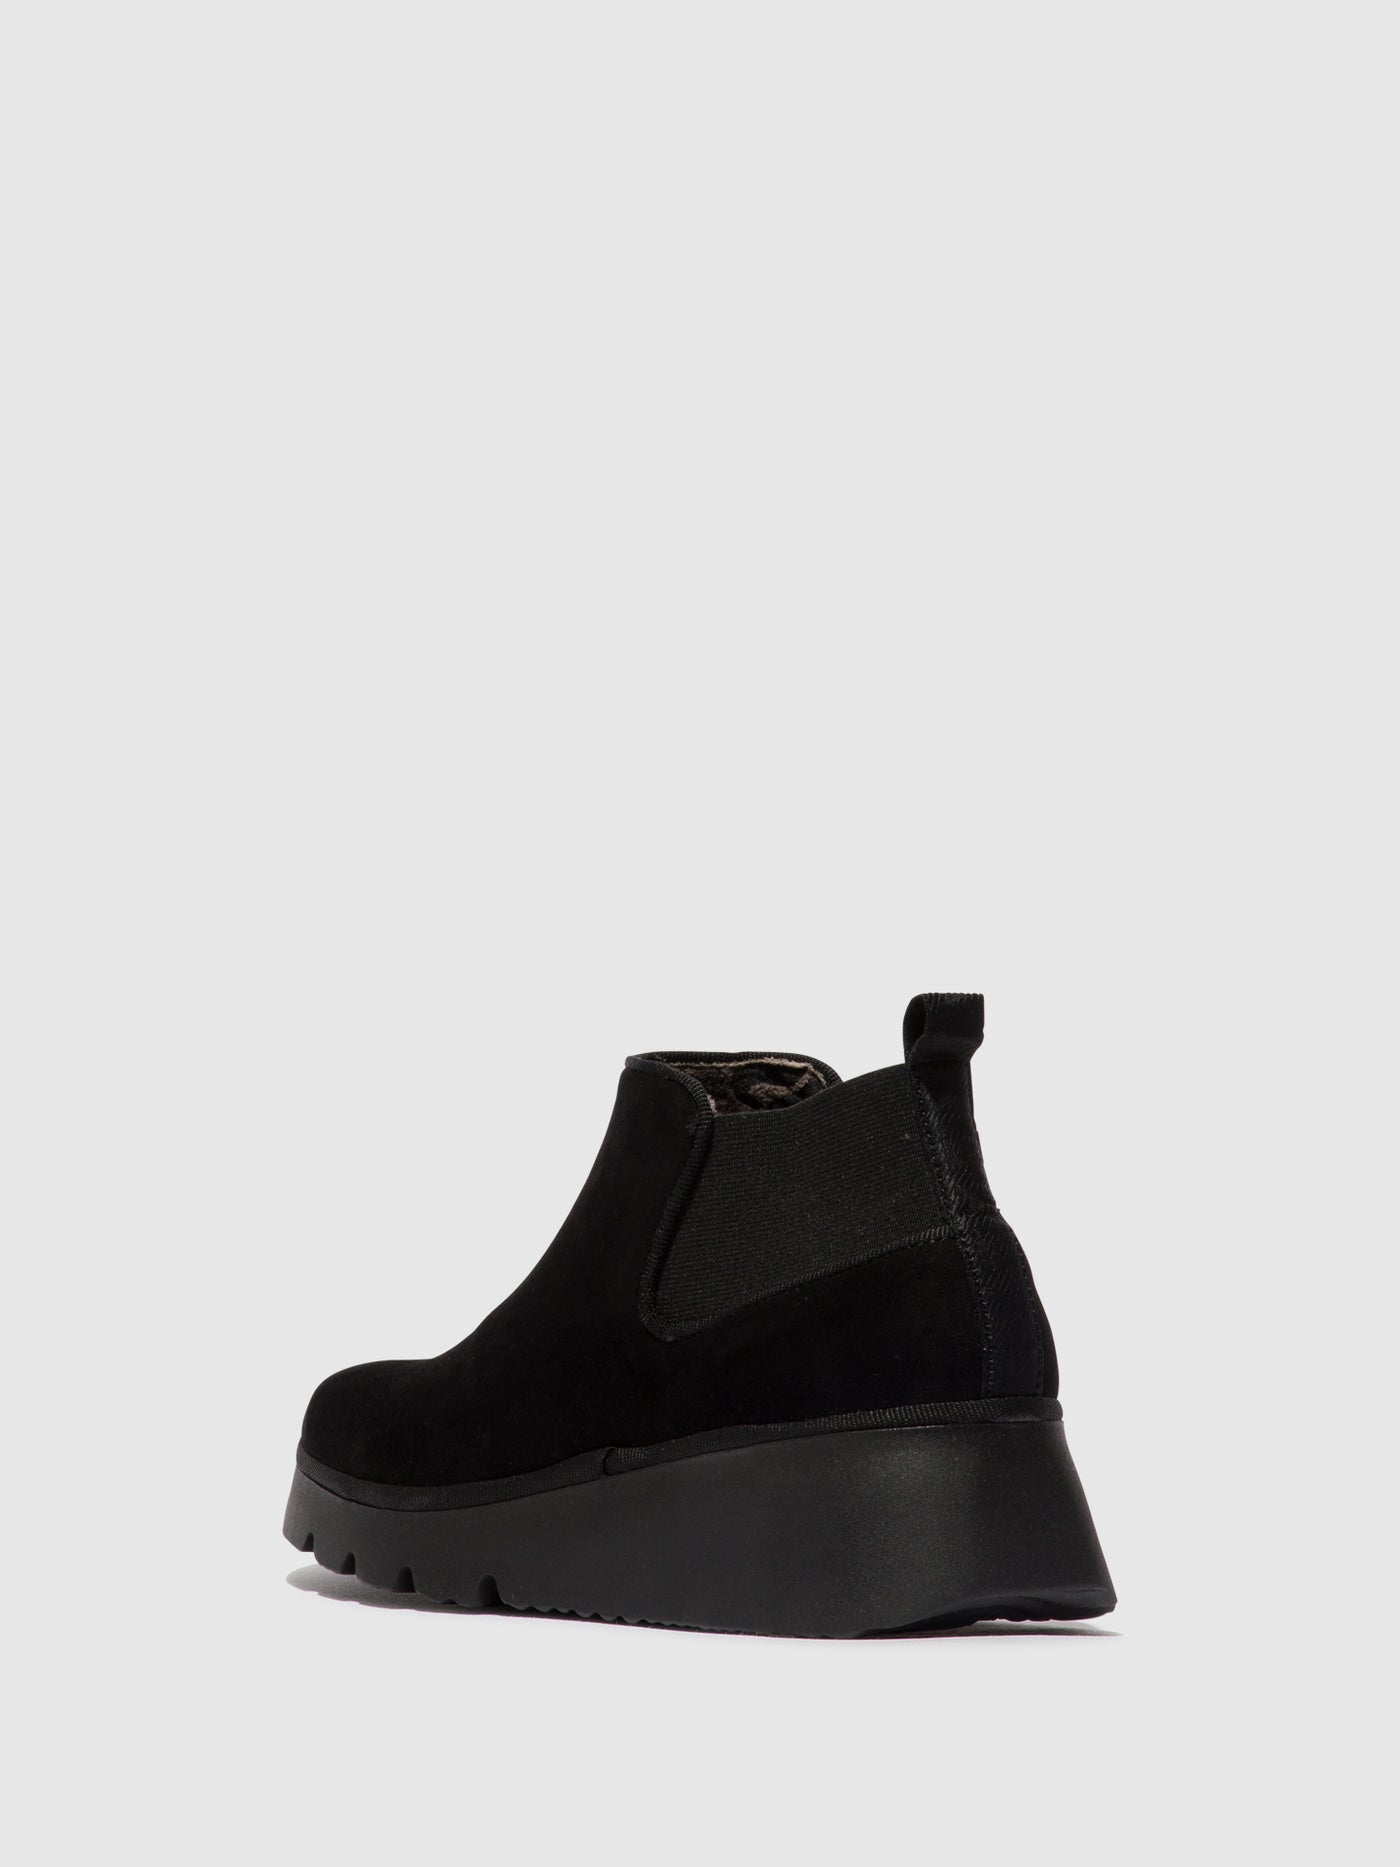 Elasticated Ankle Boots PADA403FLY KID SUEDE BLACK